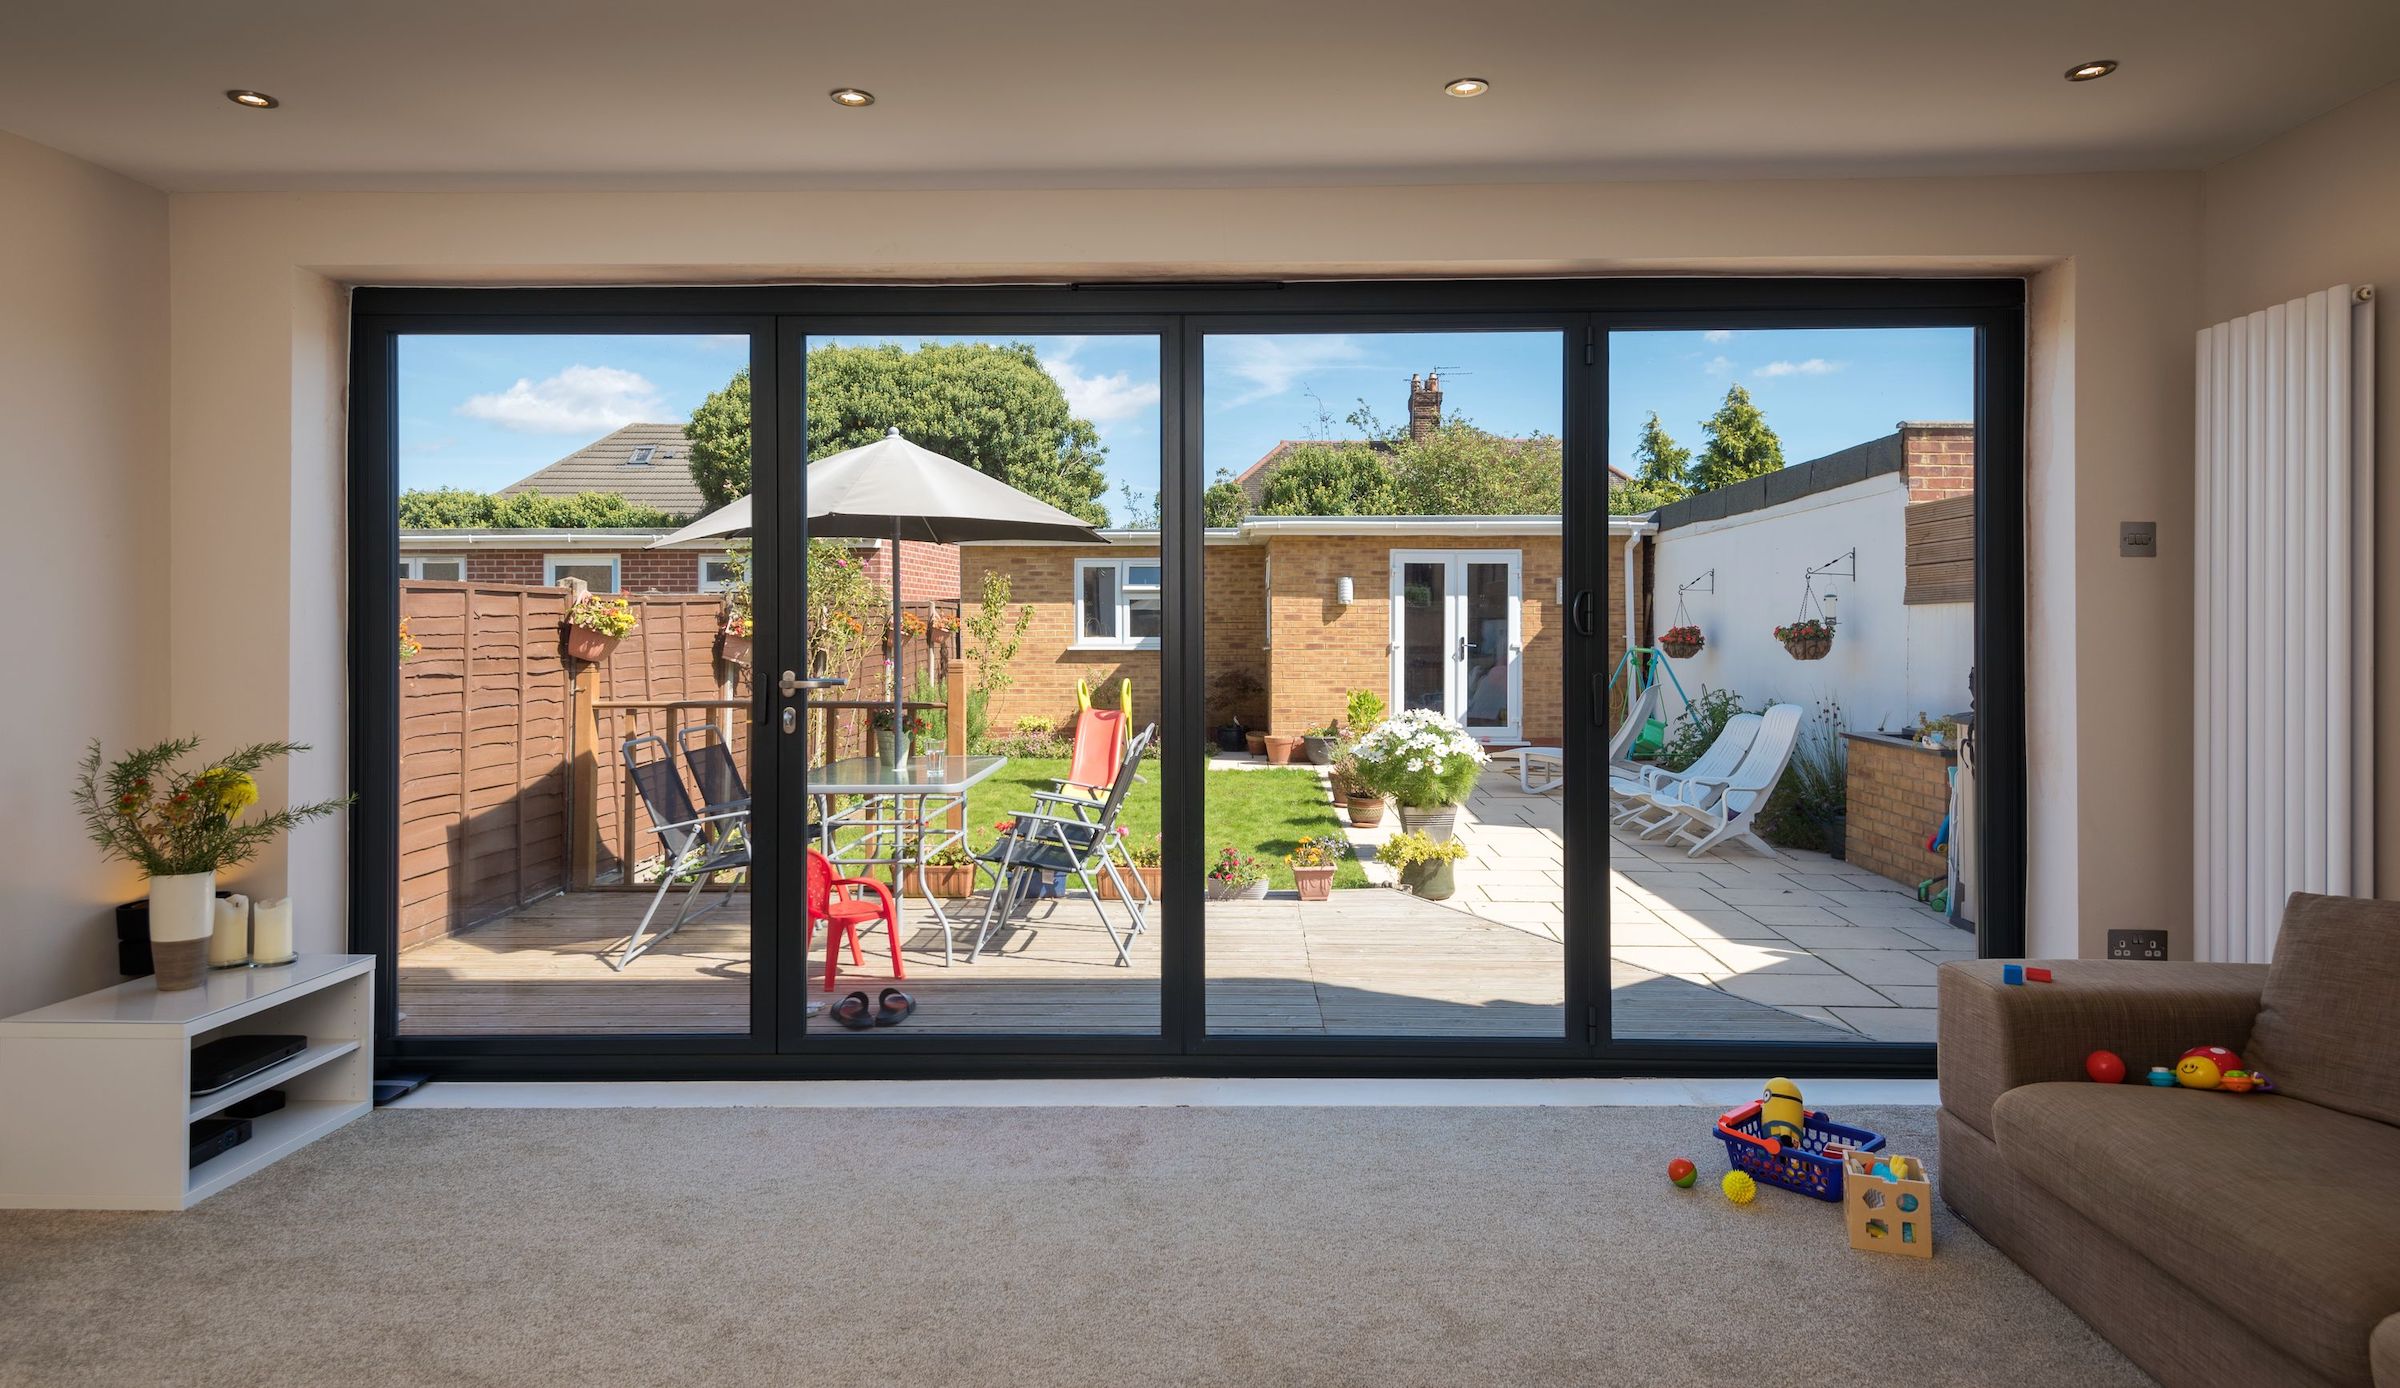 aluminium bifolding doors in a new extension with views of a garden room